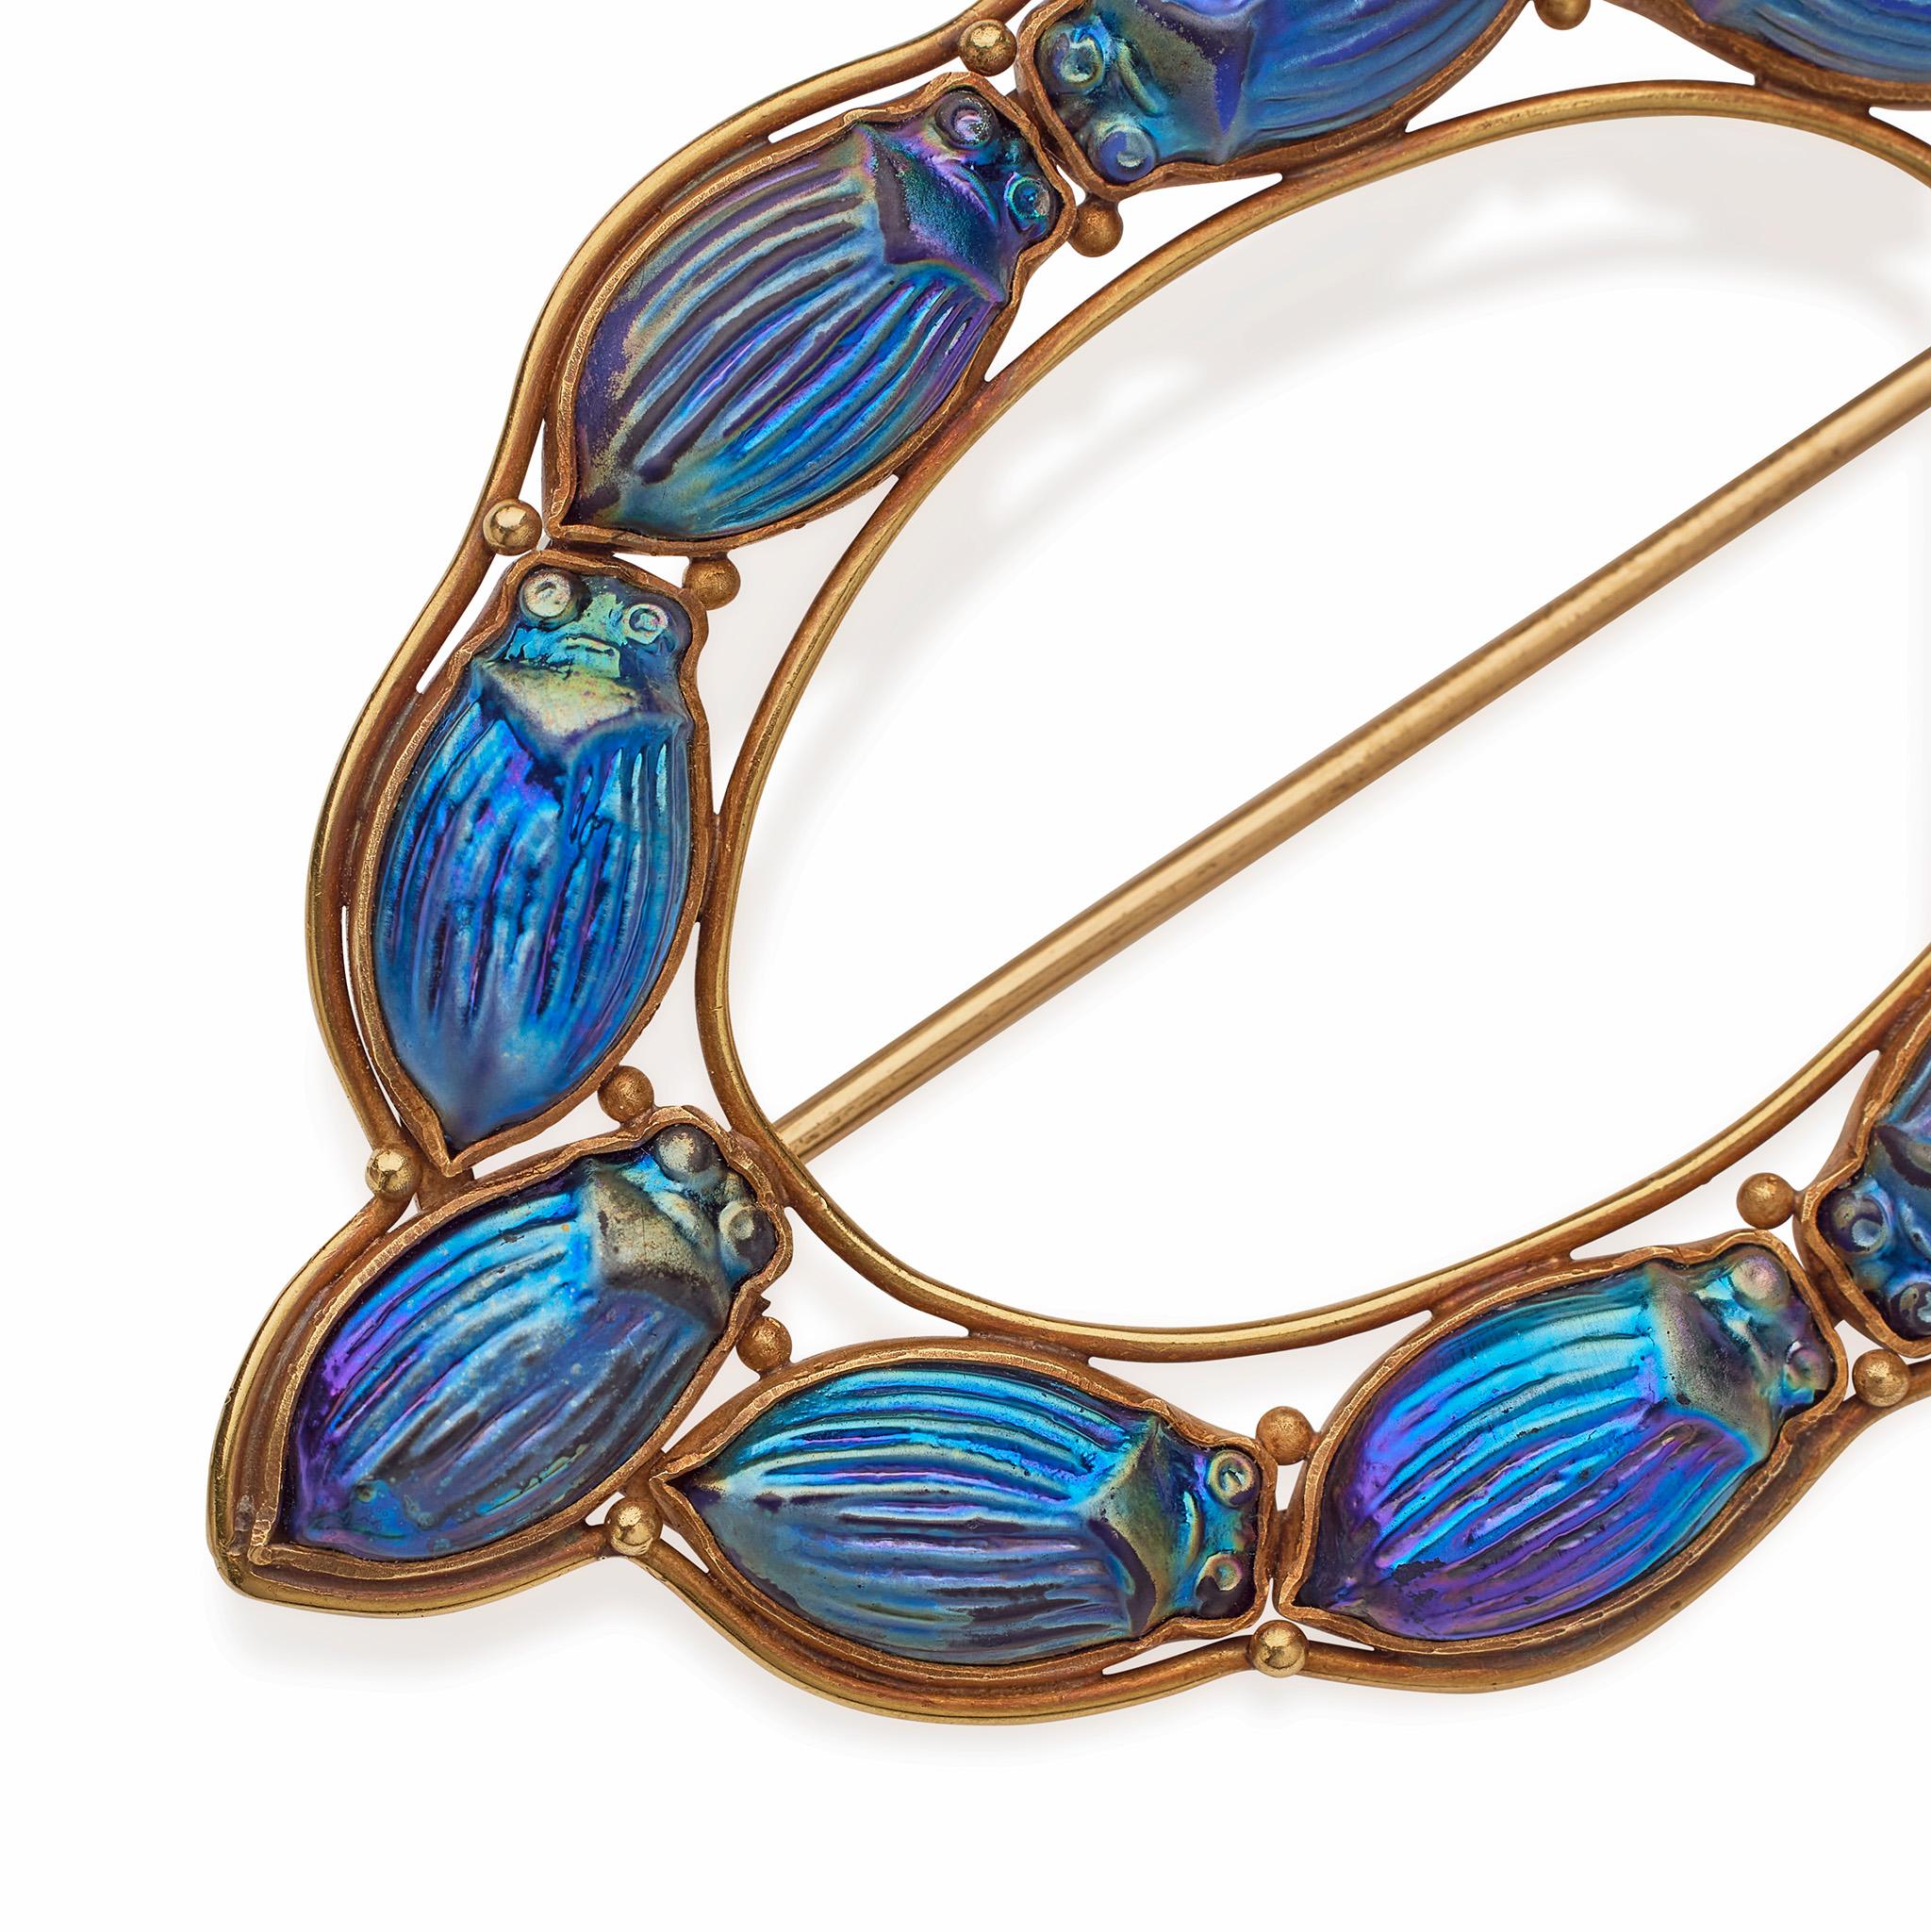 Art Nouveau Louis Tiffany at Tiffany & Co. Favrile Glass Scarab Brooch For Sale